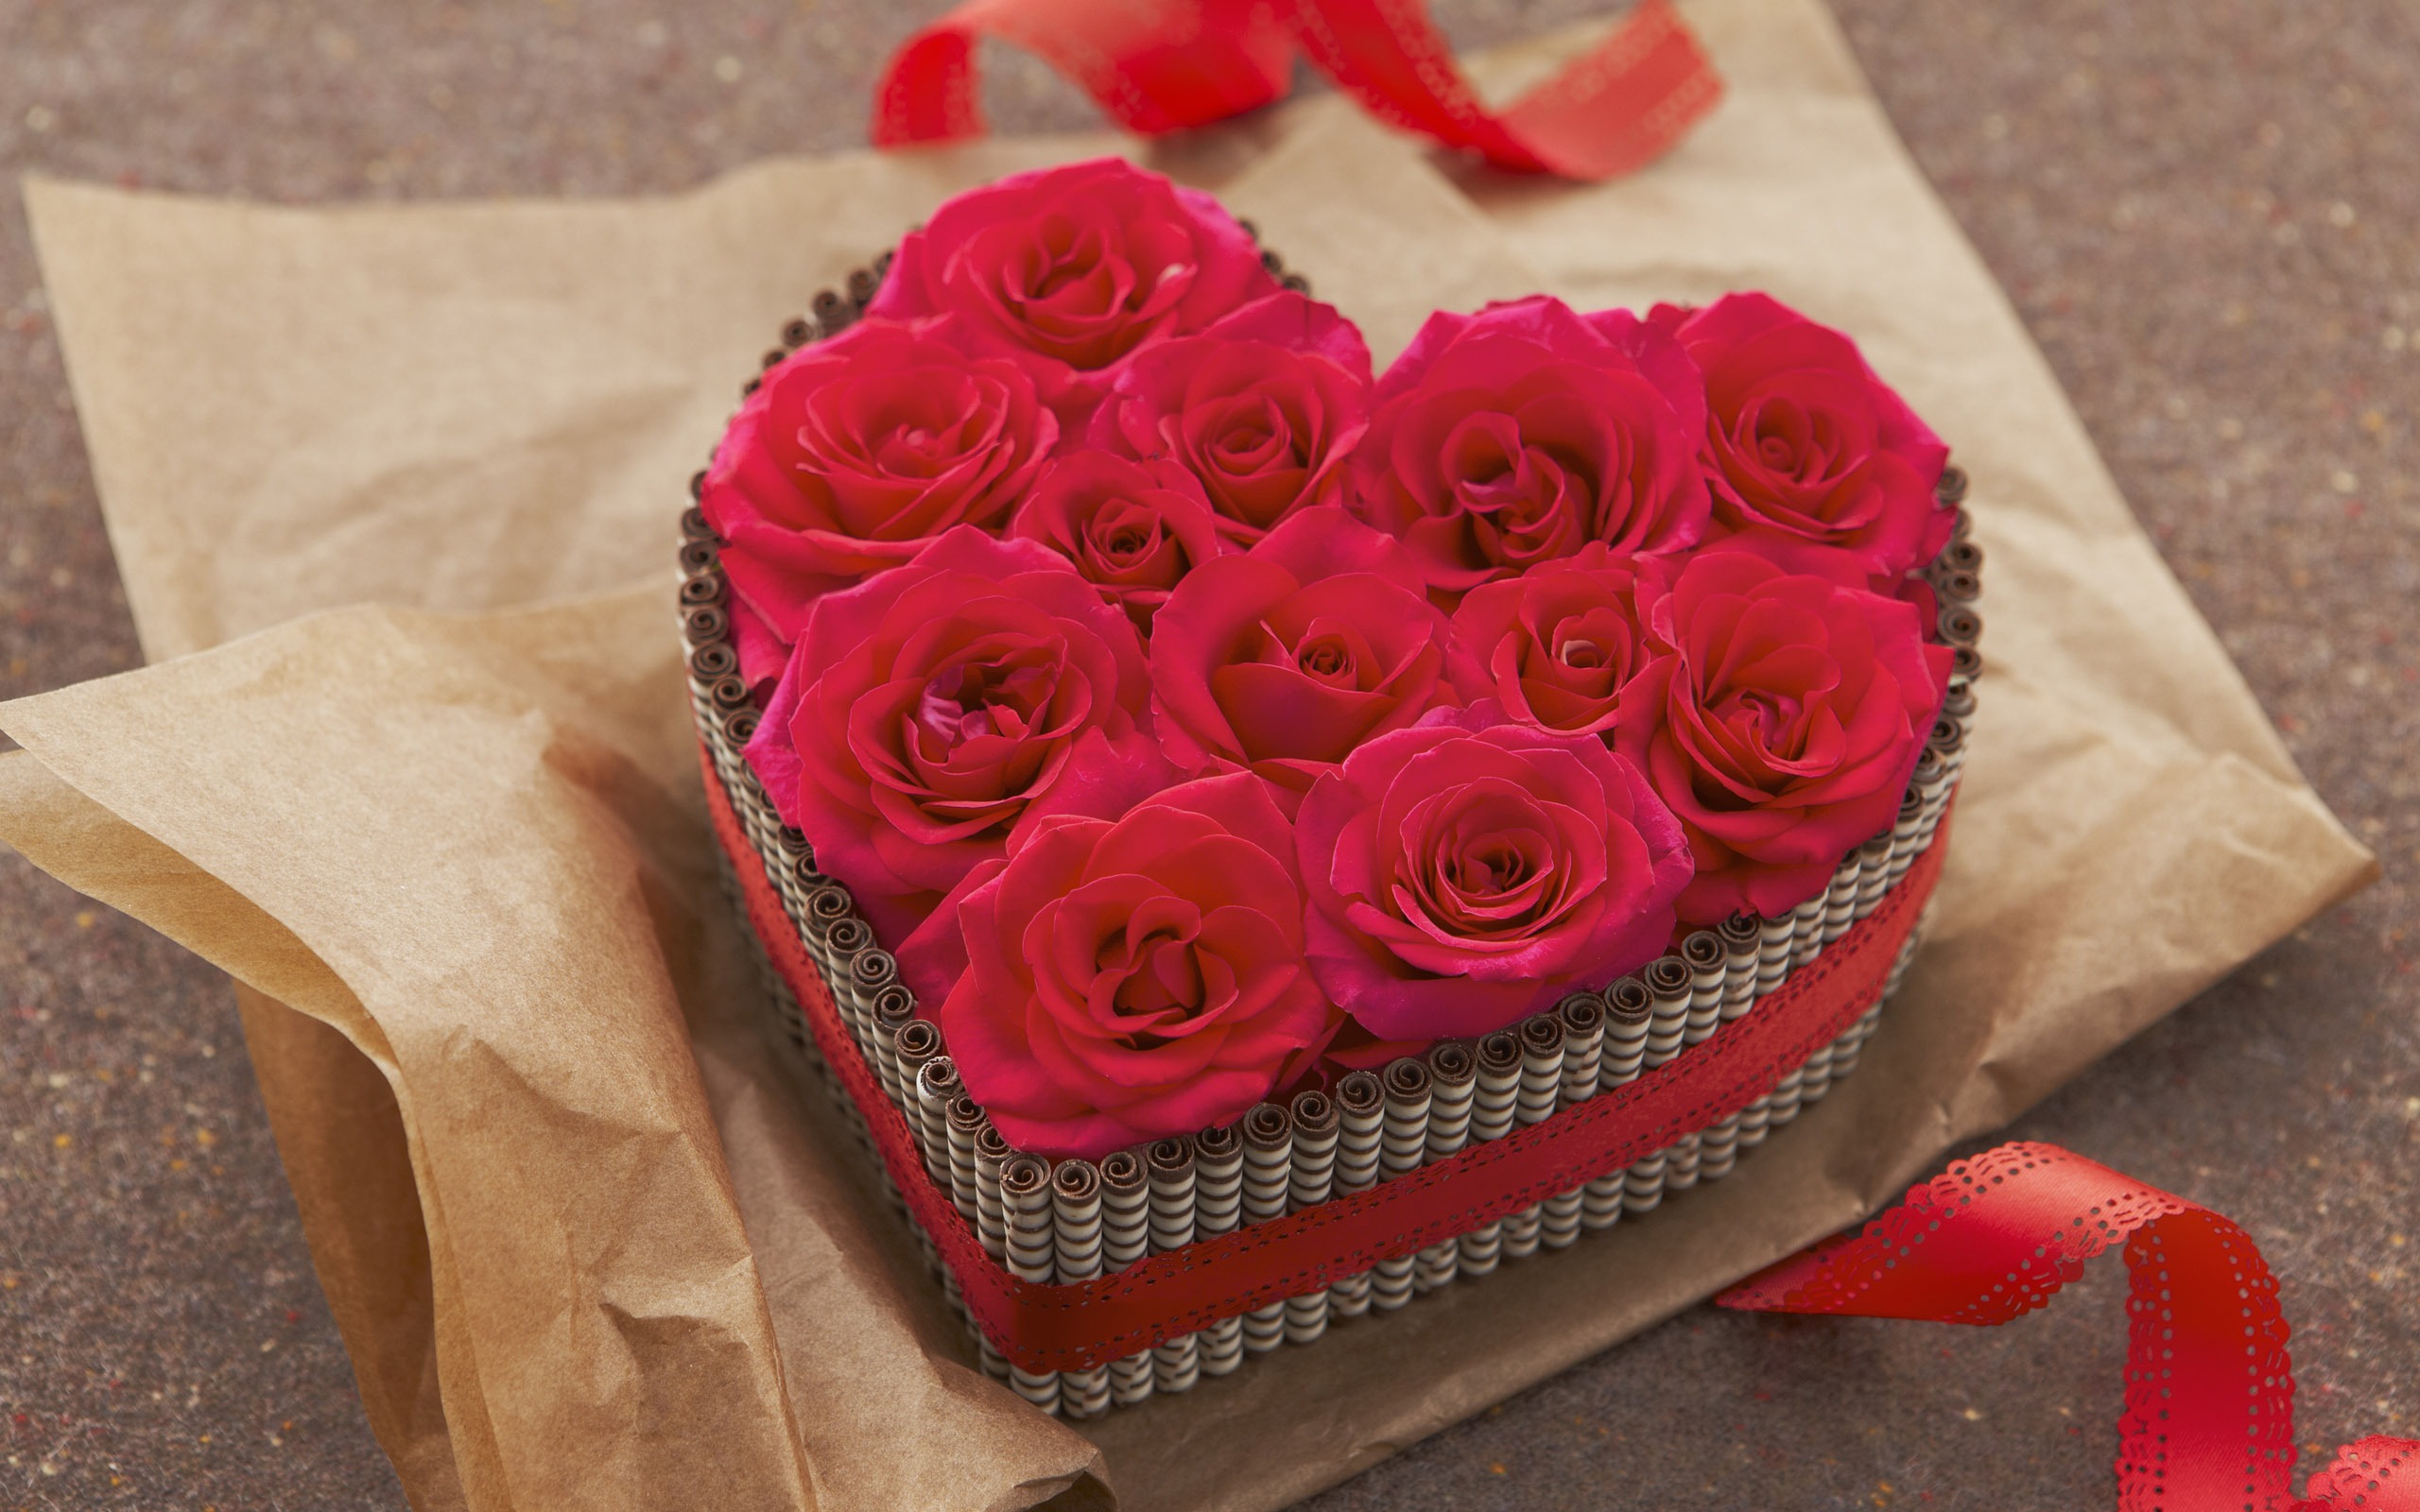 Flowers Gifts HD Wallpapers (2) #13 - 2560x1600